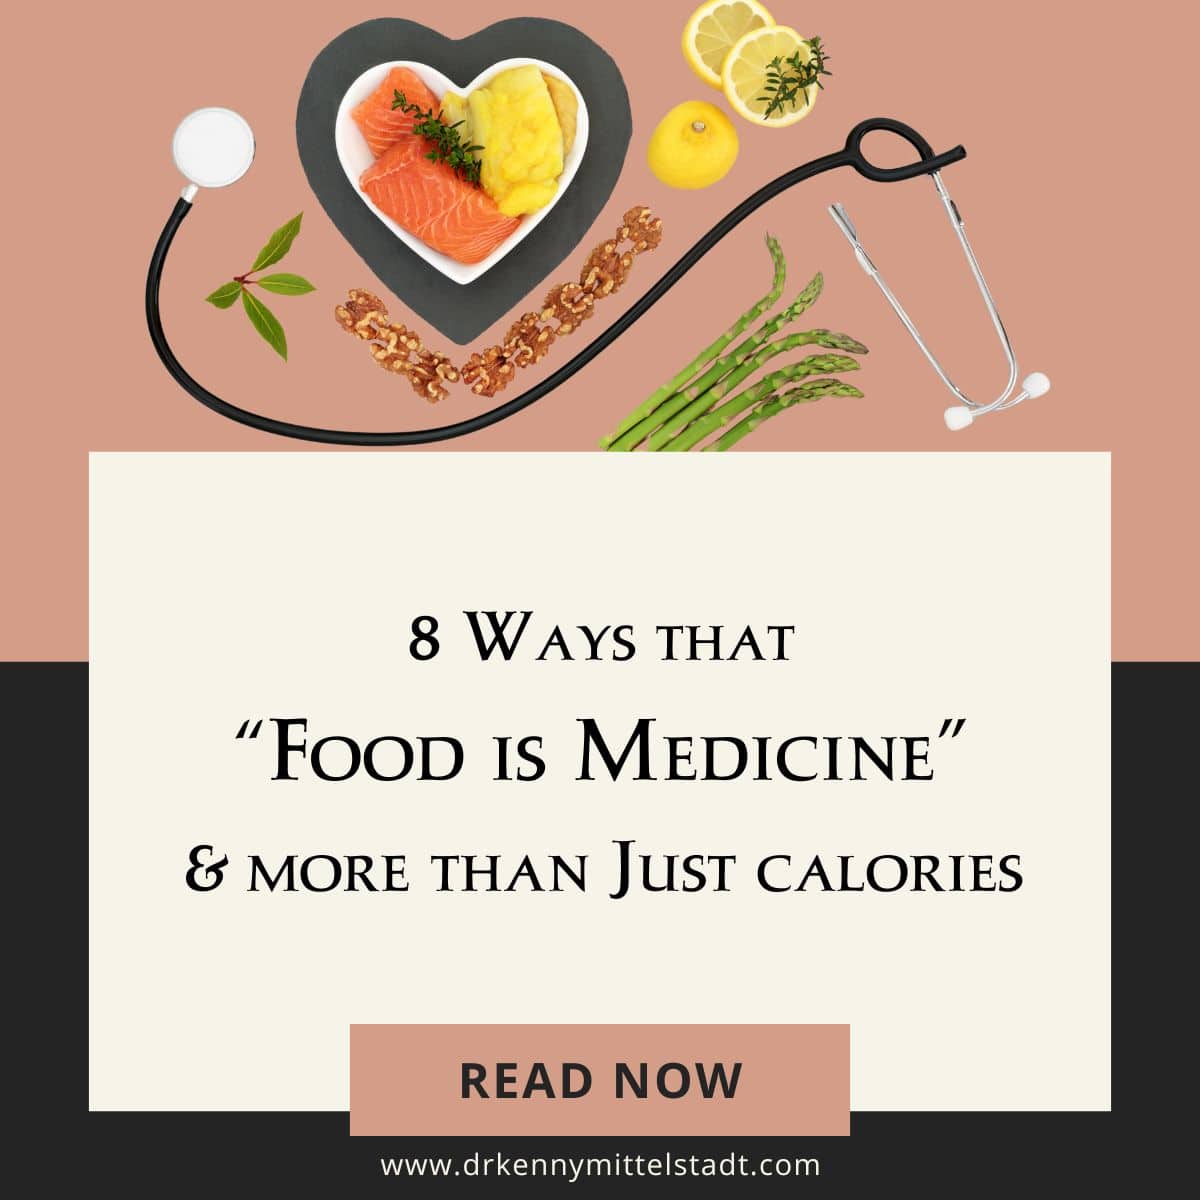 This is the title image depicting the post title "8 Ways that 'Food is Medicine' and More than Just Calories" with a picture of common foods surrounded by a stethoscope.